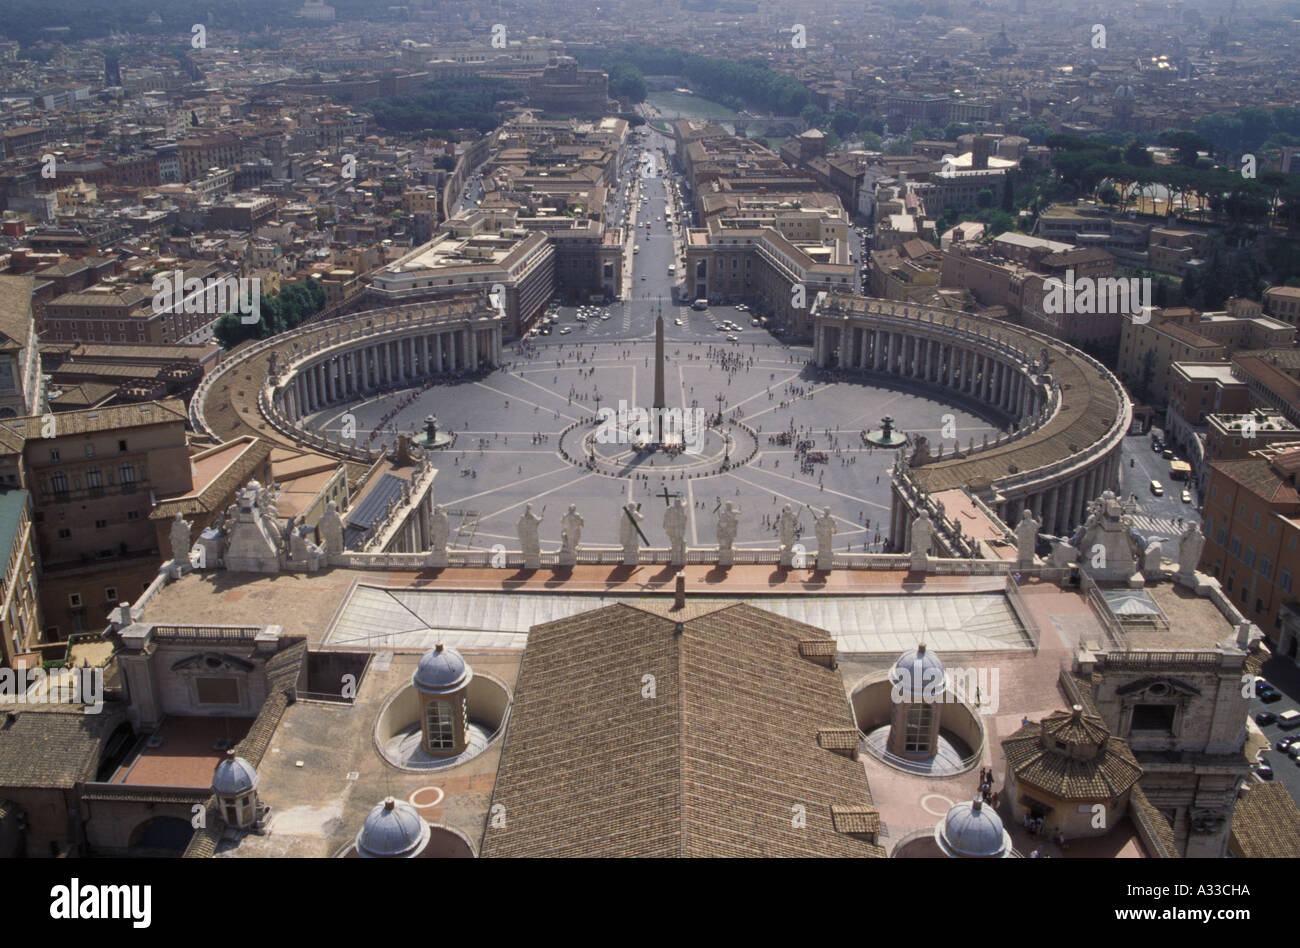 St Peter's Square, Piazza San Pietro, from the Dome of St Peter's Basilica, Rome, Italy Stock Photo